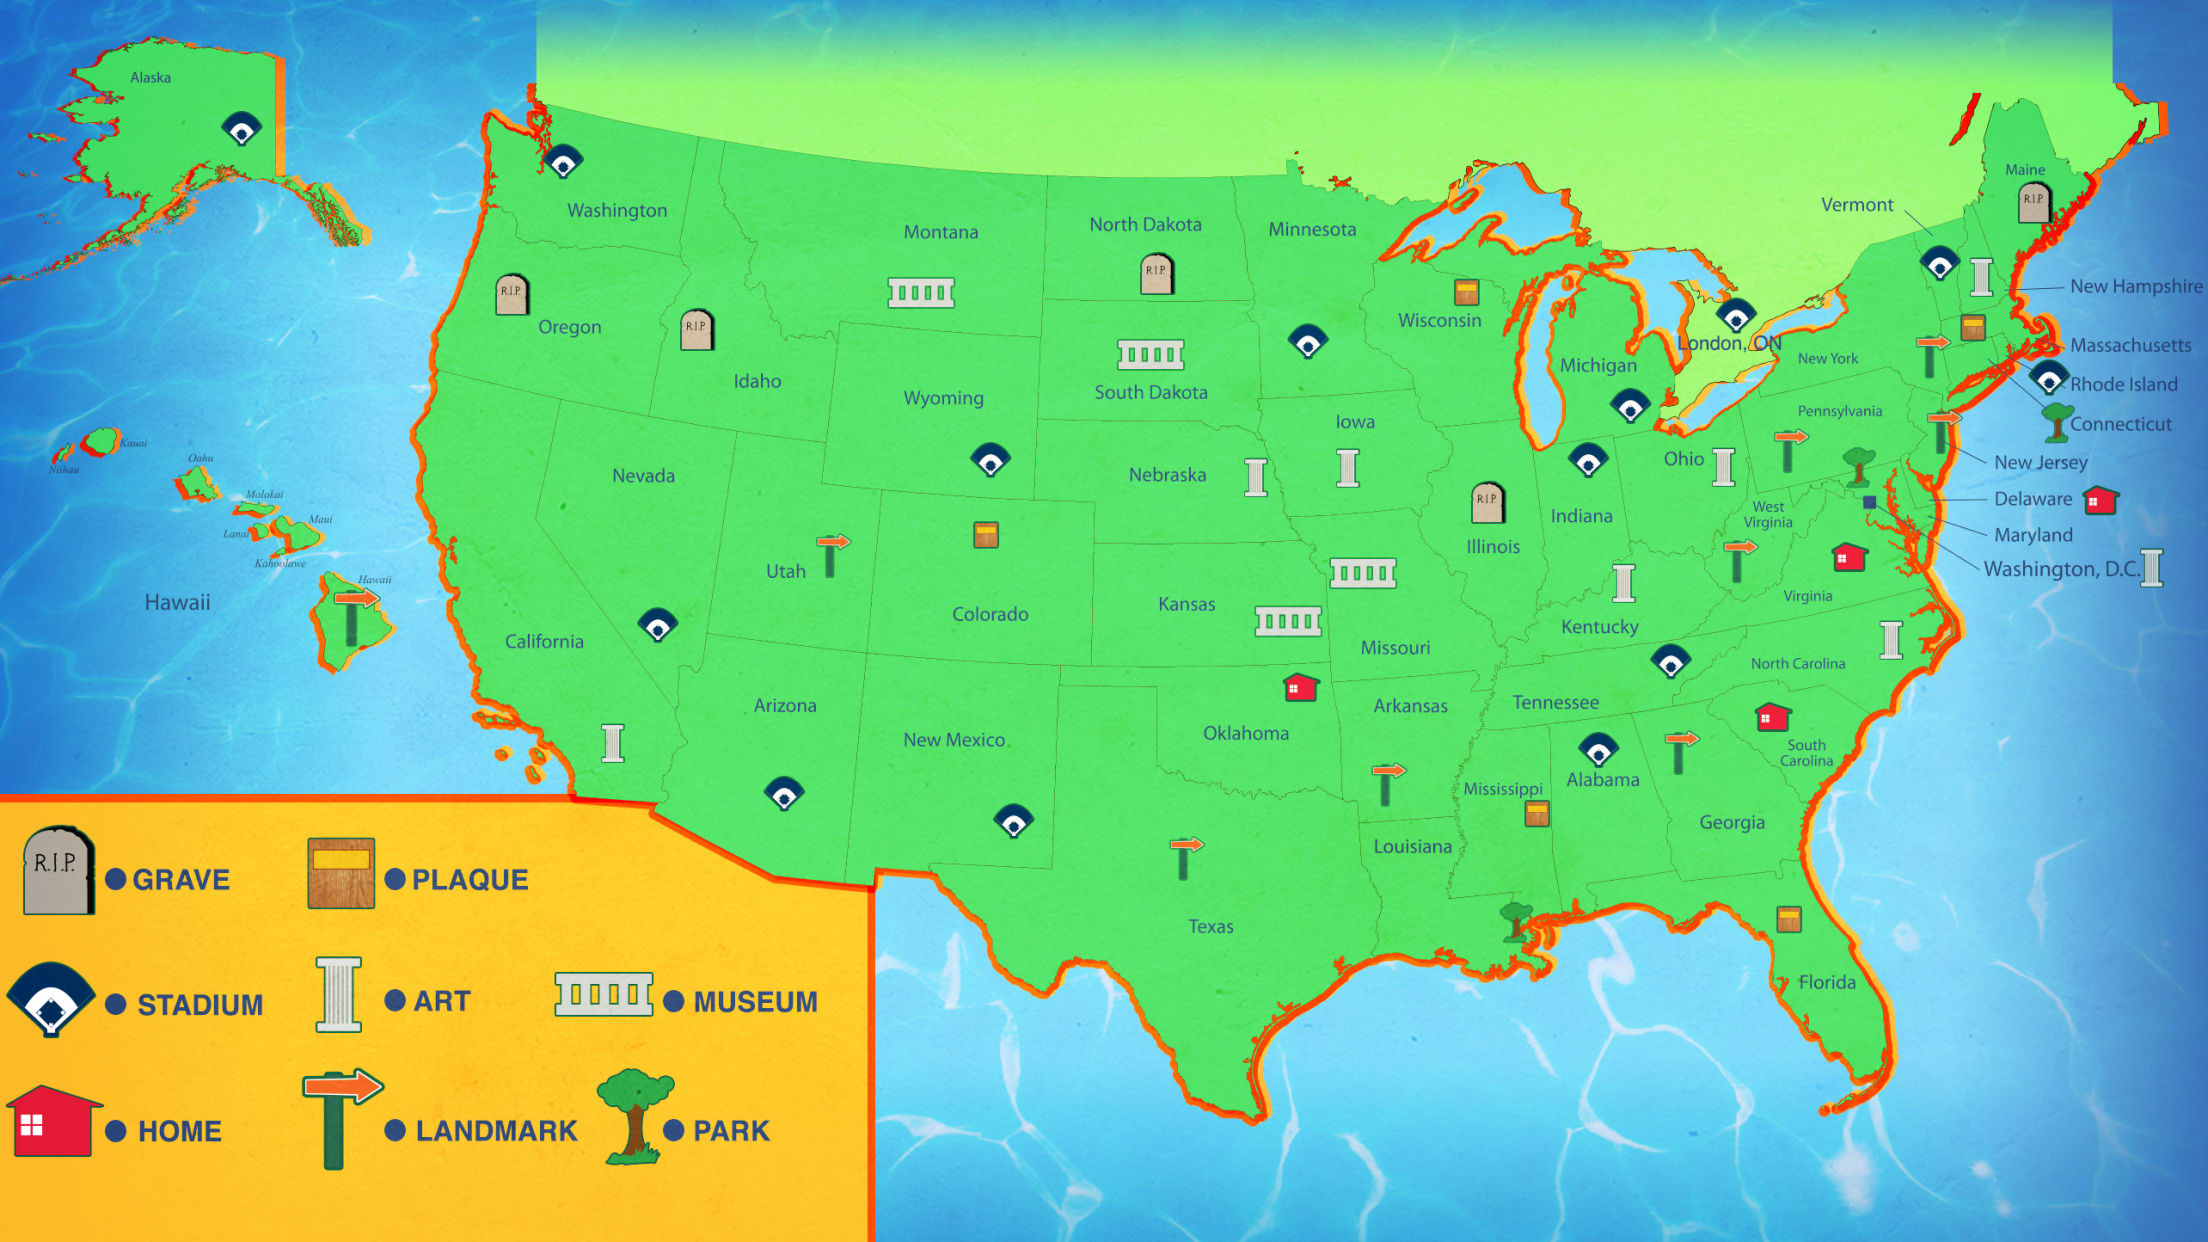 Baseball road trip locations in all 8 states and Ontario   MLB.com